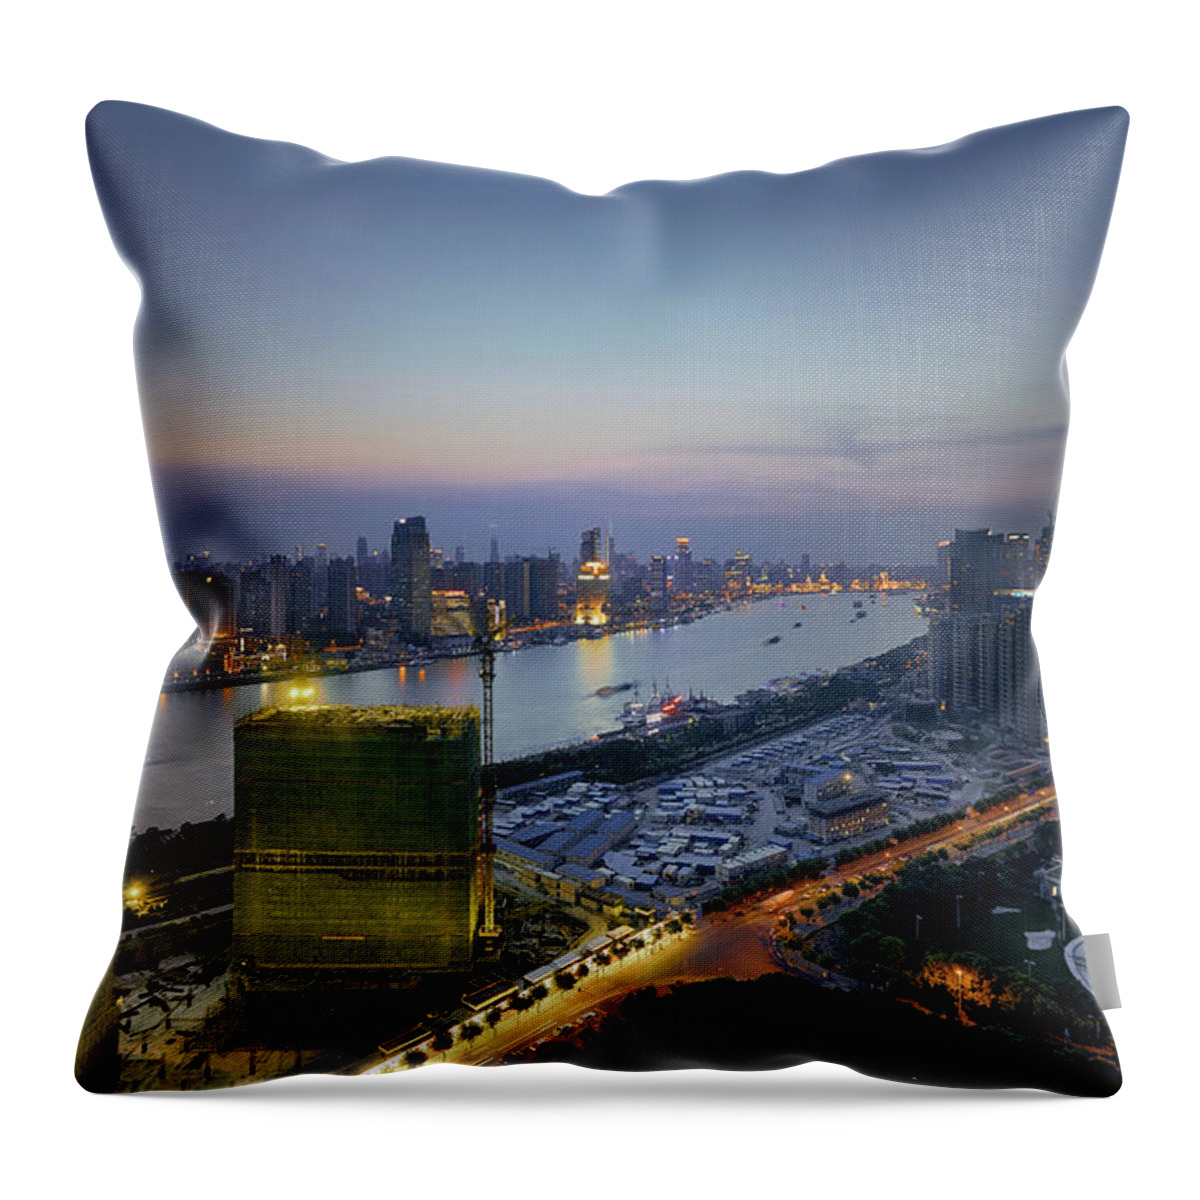 Outdoors Throw Pillow featuring the photograph The Construction Plant by Blackstation